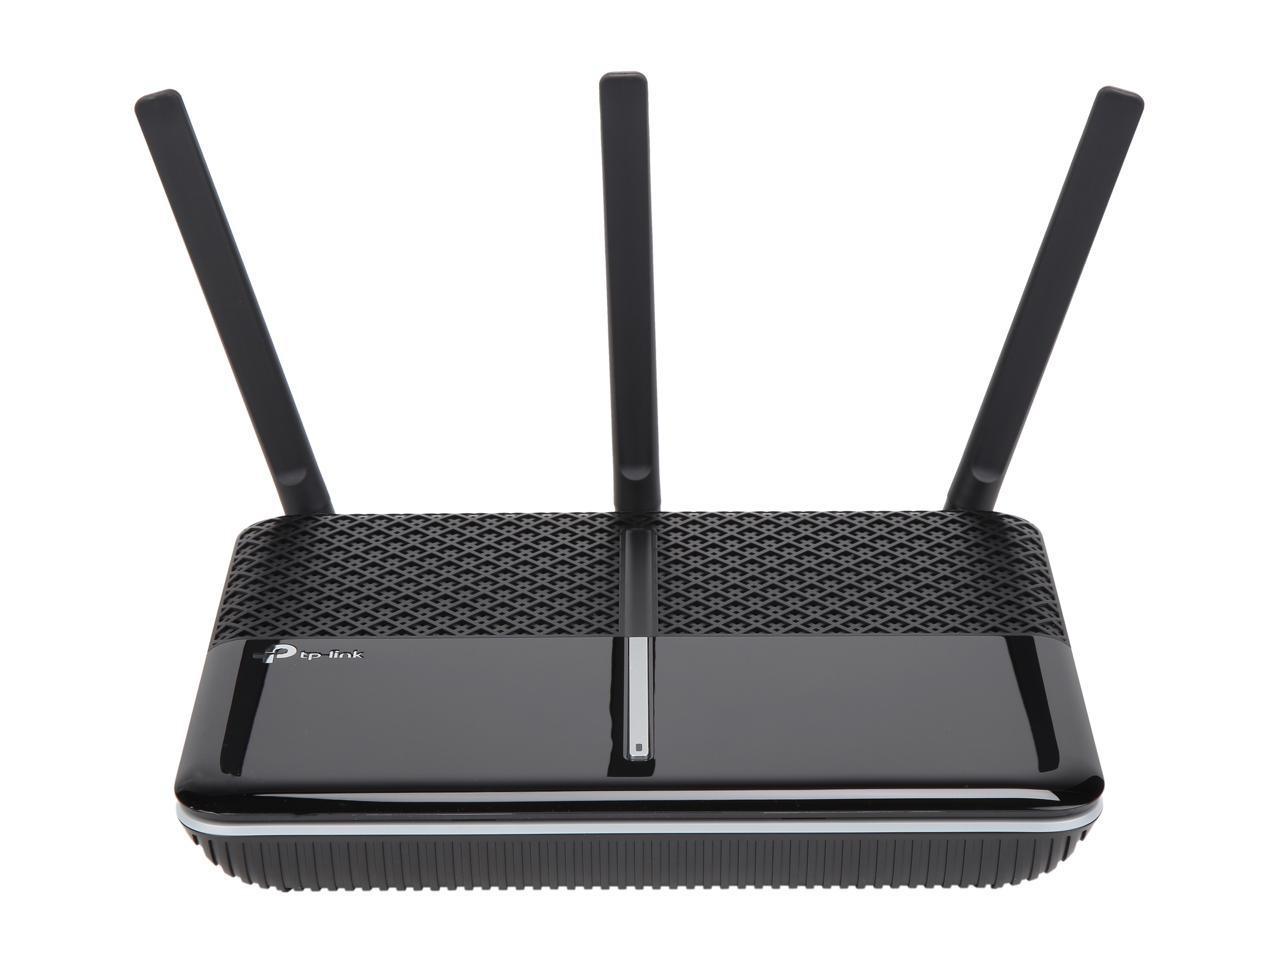 TP-Link AC2600 Smart Wi-Fi Router - MU-MIMO, Gigabit, Beamforming, VPN Server, Works with Alexa & IFTTT (Archer A10)